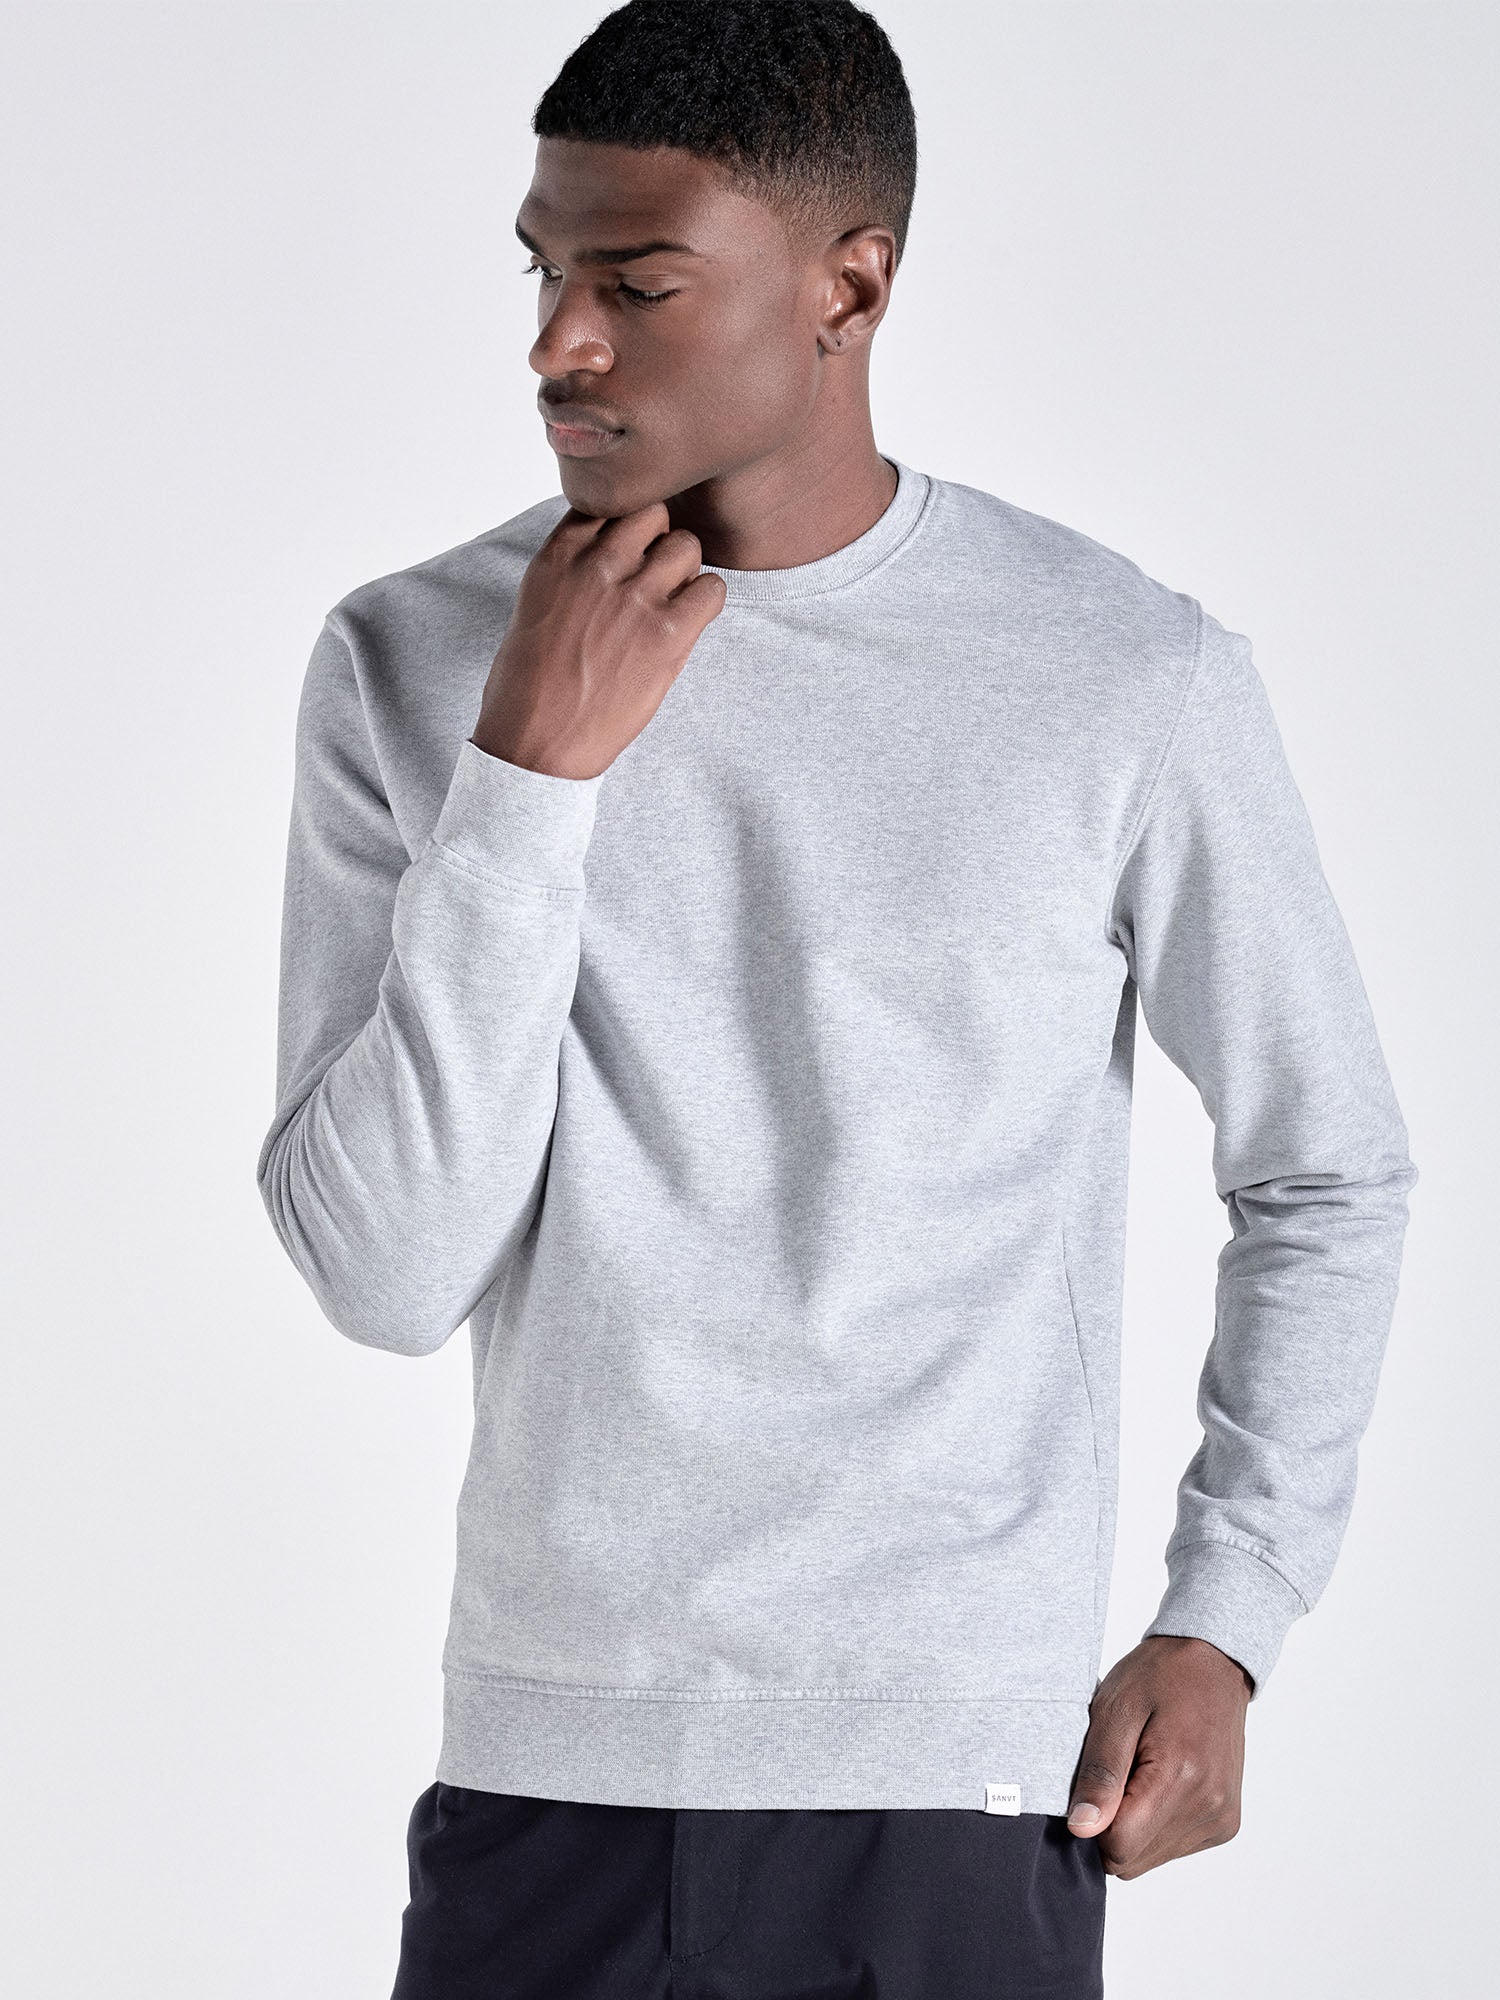 The Perfect Sweatshirt | High-quality Cotton Jumpers for Men